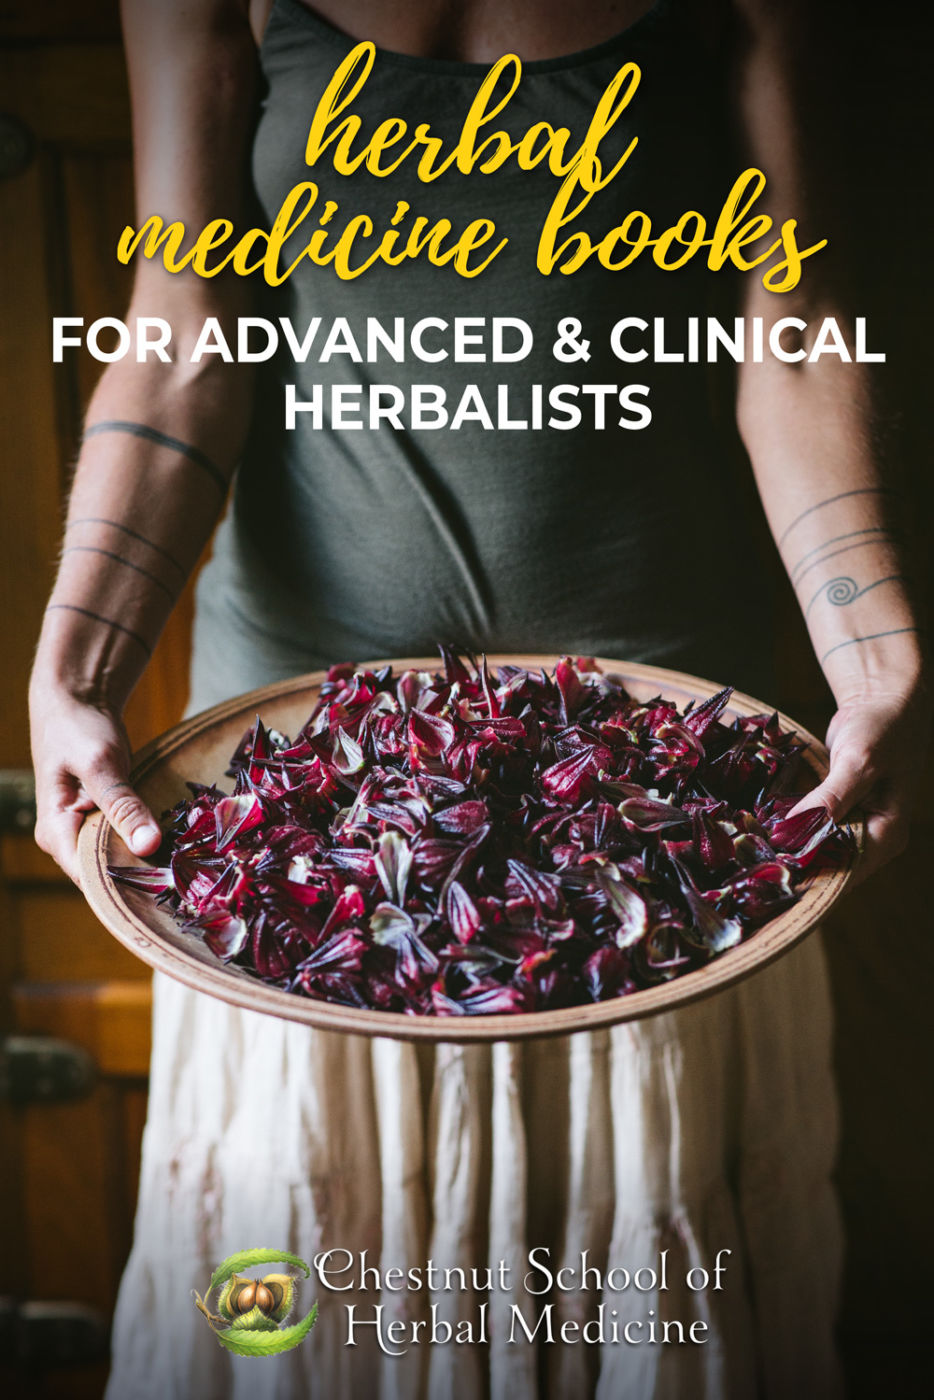 Herbal Medicine Books for Advanced & Clinical Herbalists.